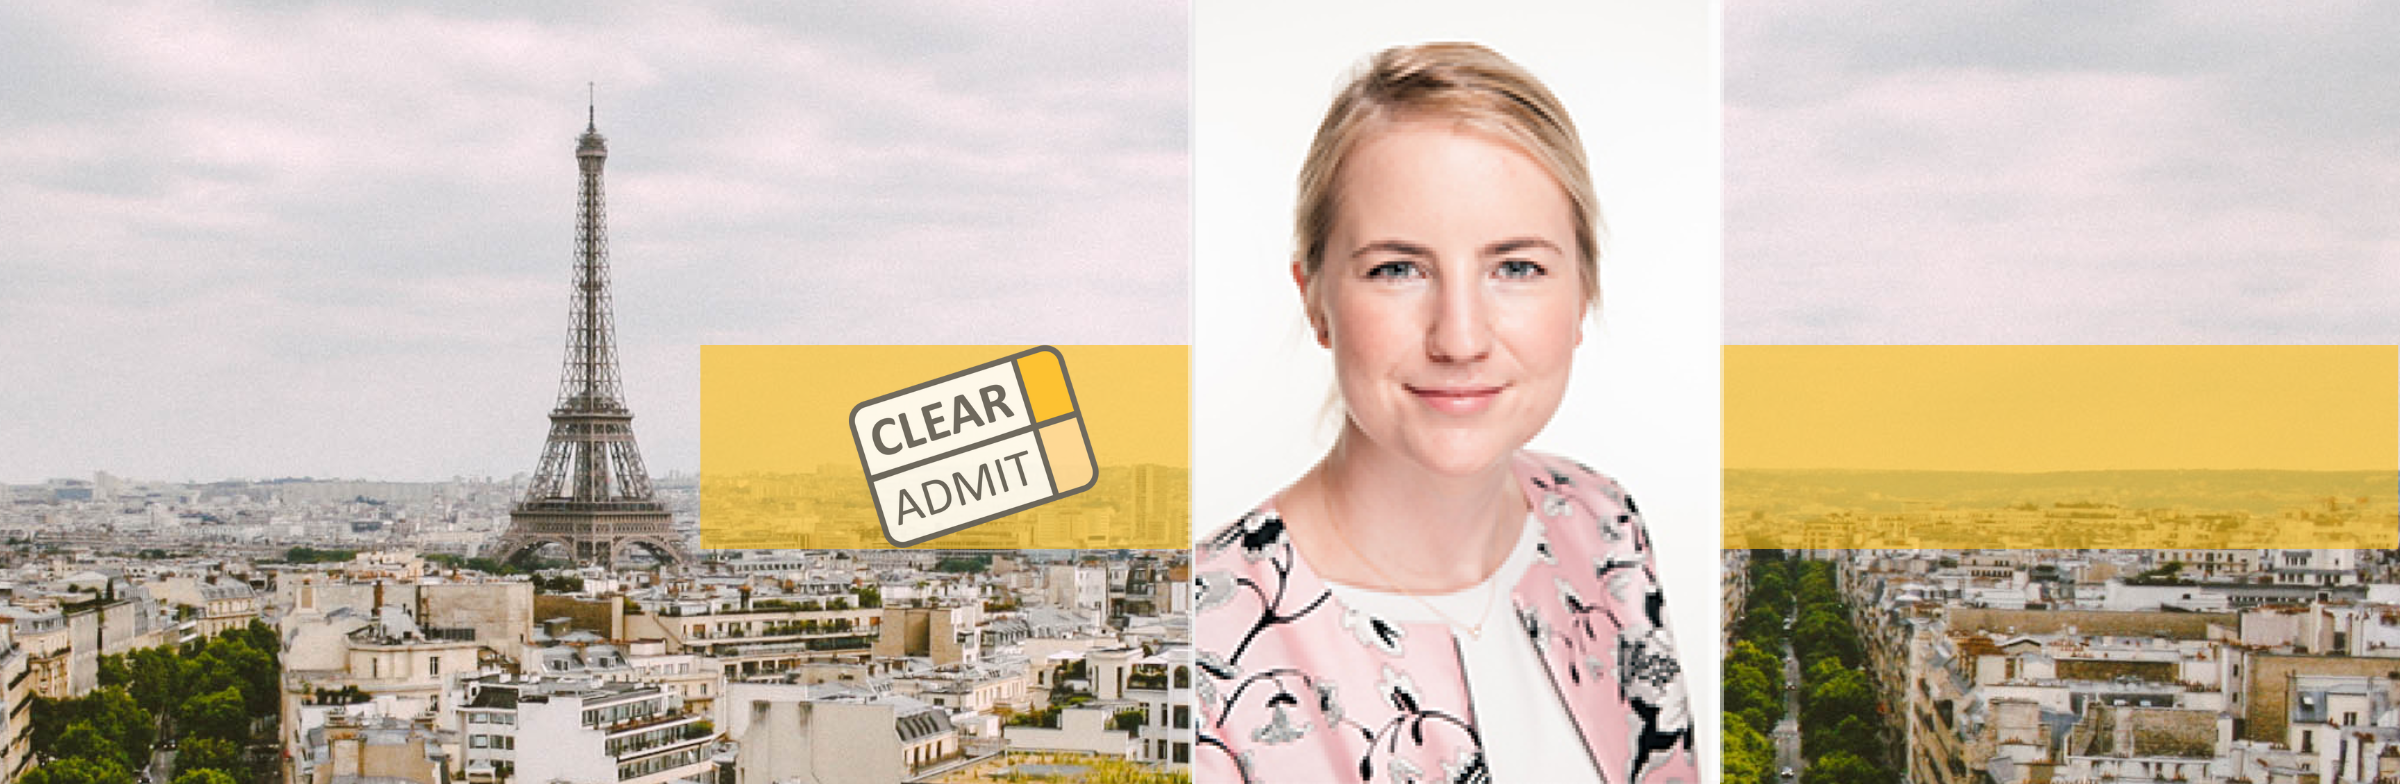 Image for HEC Paris & Launching a Life in France: Clare Cartwright, HEC Paris MBA ’20